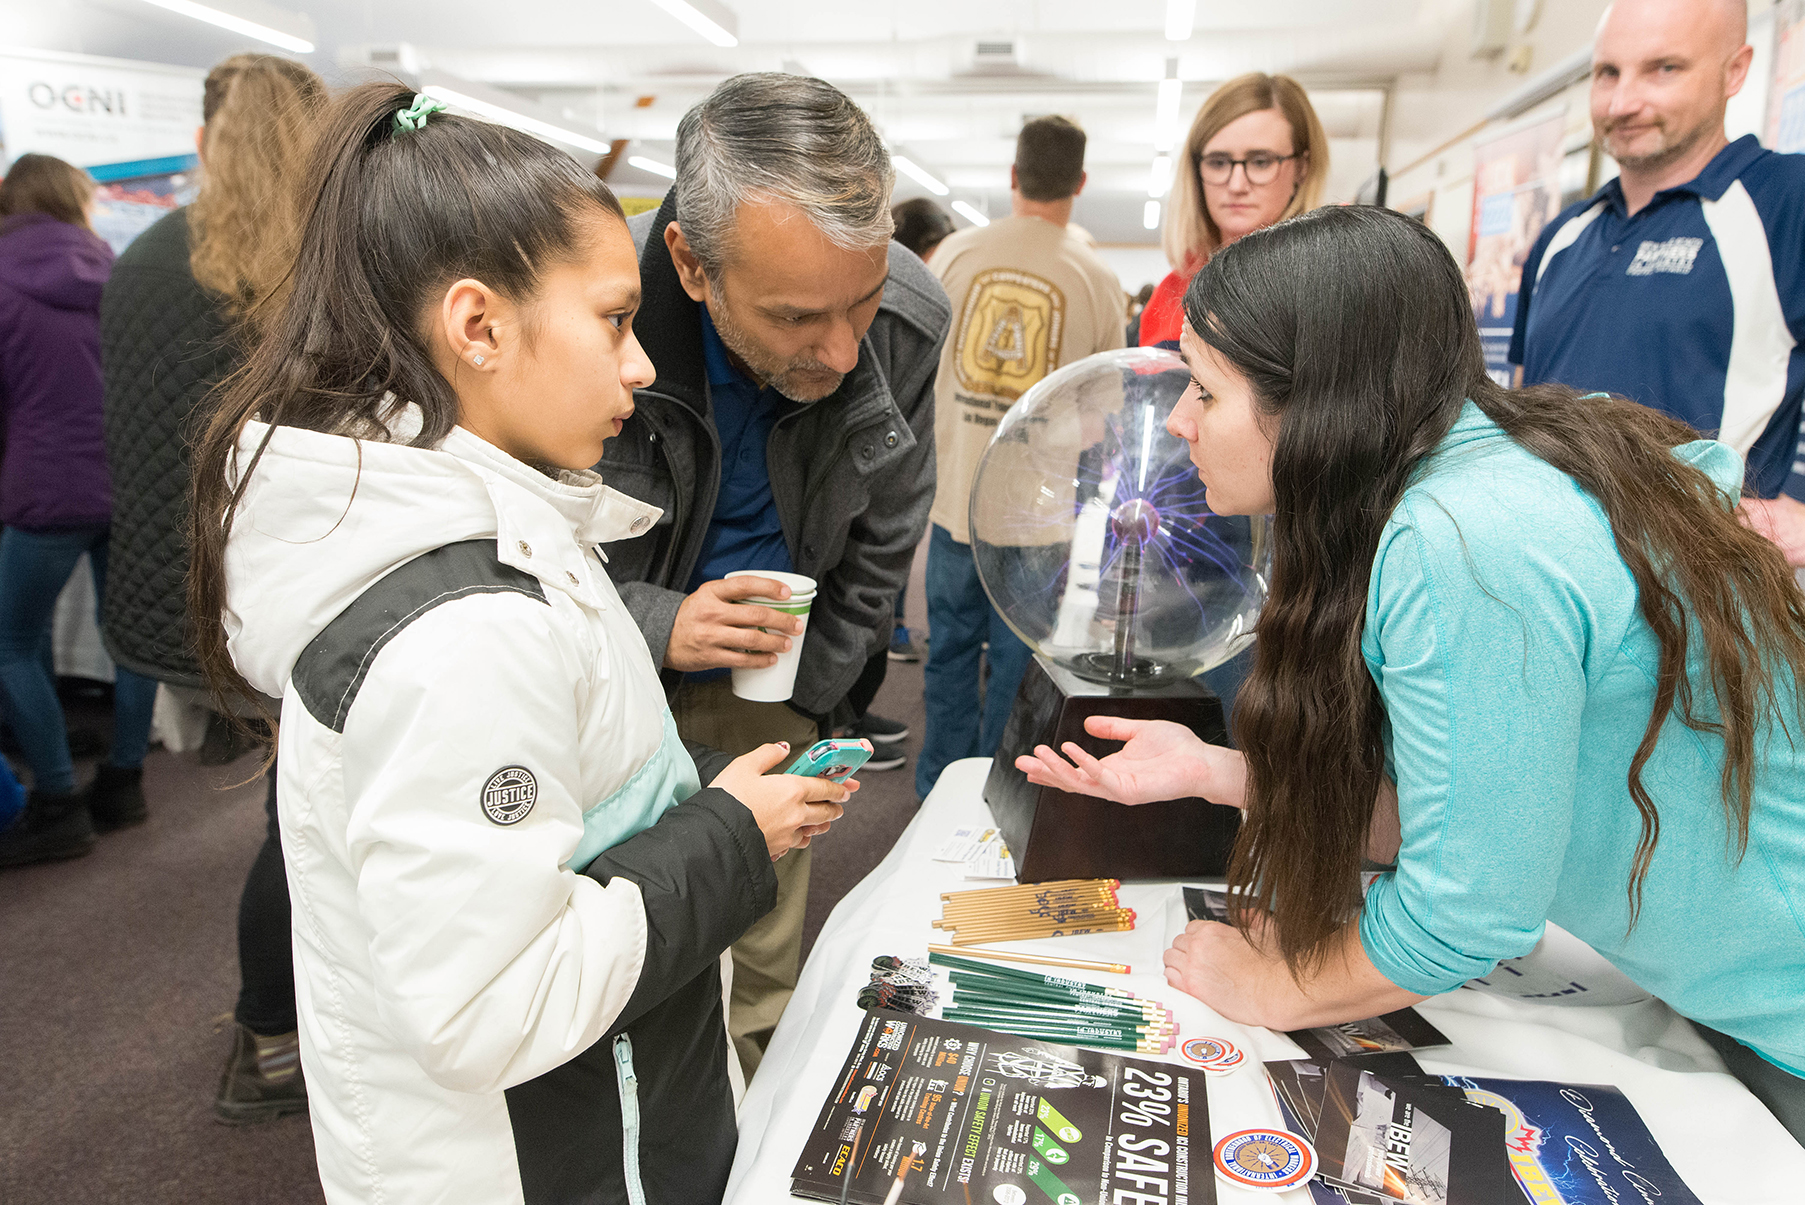 A father and daughter discuss careers with a female electrician at Build a Dream's career discovery expo.